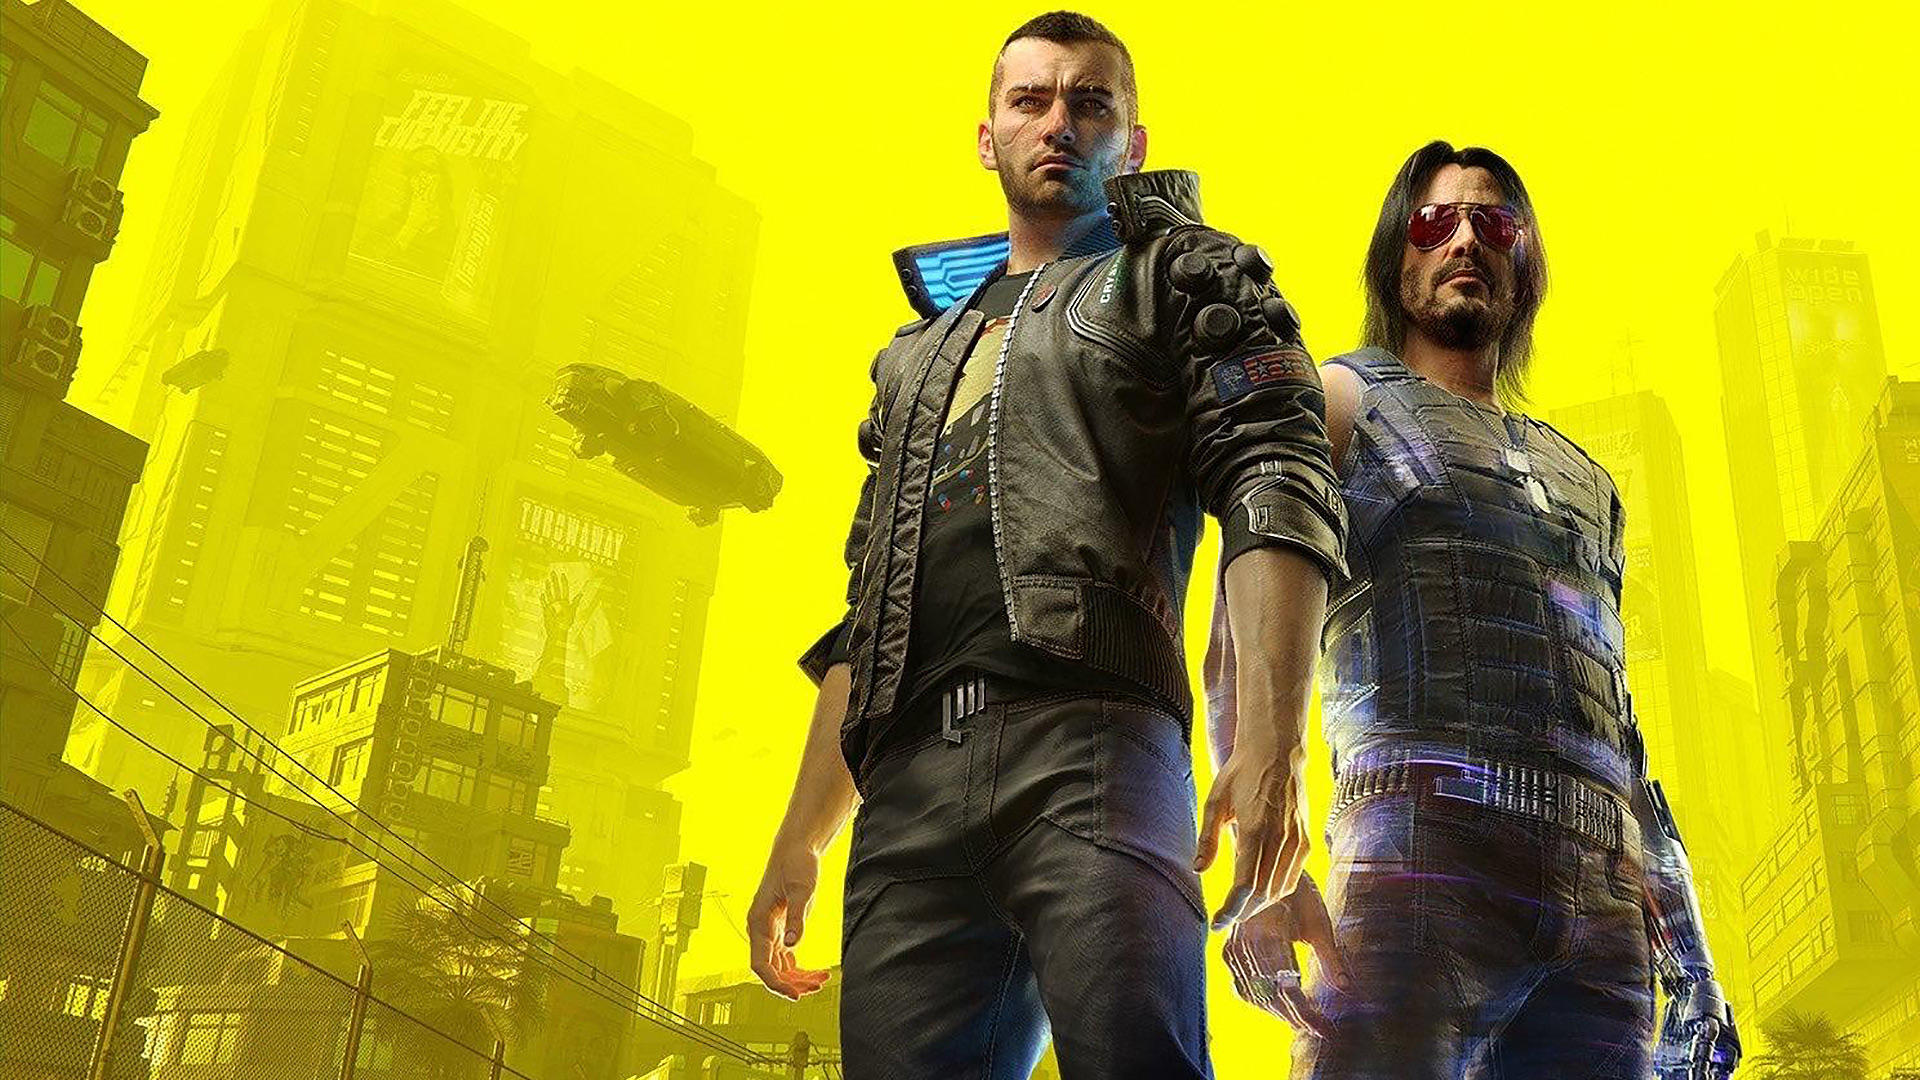 Cyberpunk 2077 Patch 1.05 Is Now Available On PC, How Much Difference Have These Updates Actually Made?